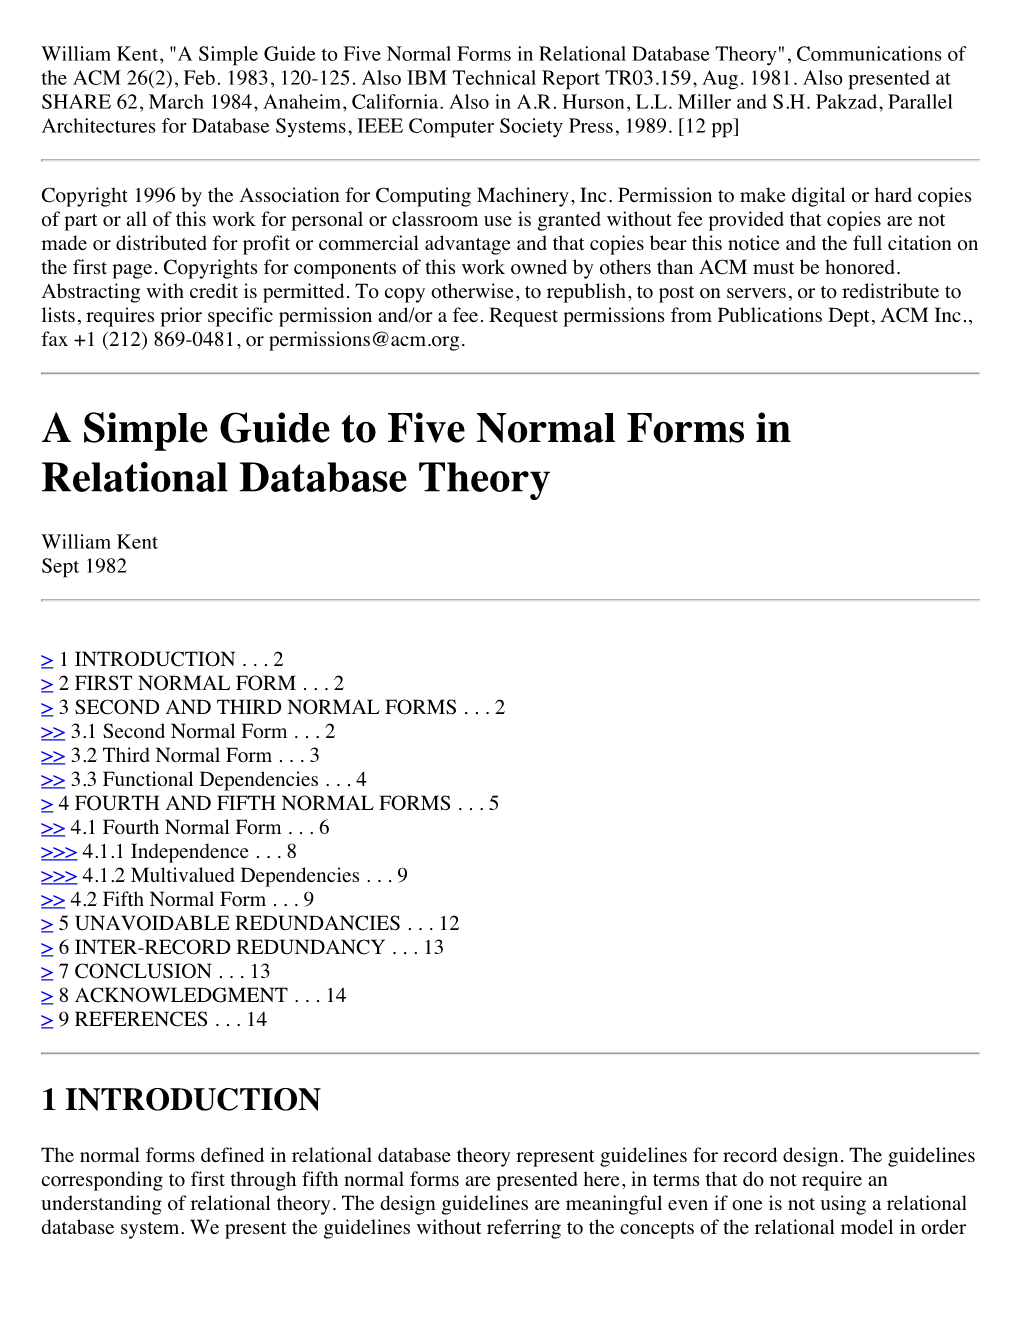 A Simple Guide to Five Normal Forms in Relational Database Theory", Communications of the ACM 26(2), Feb